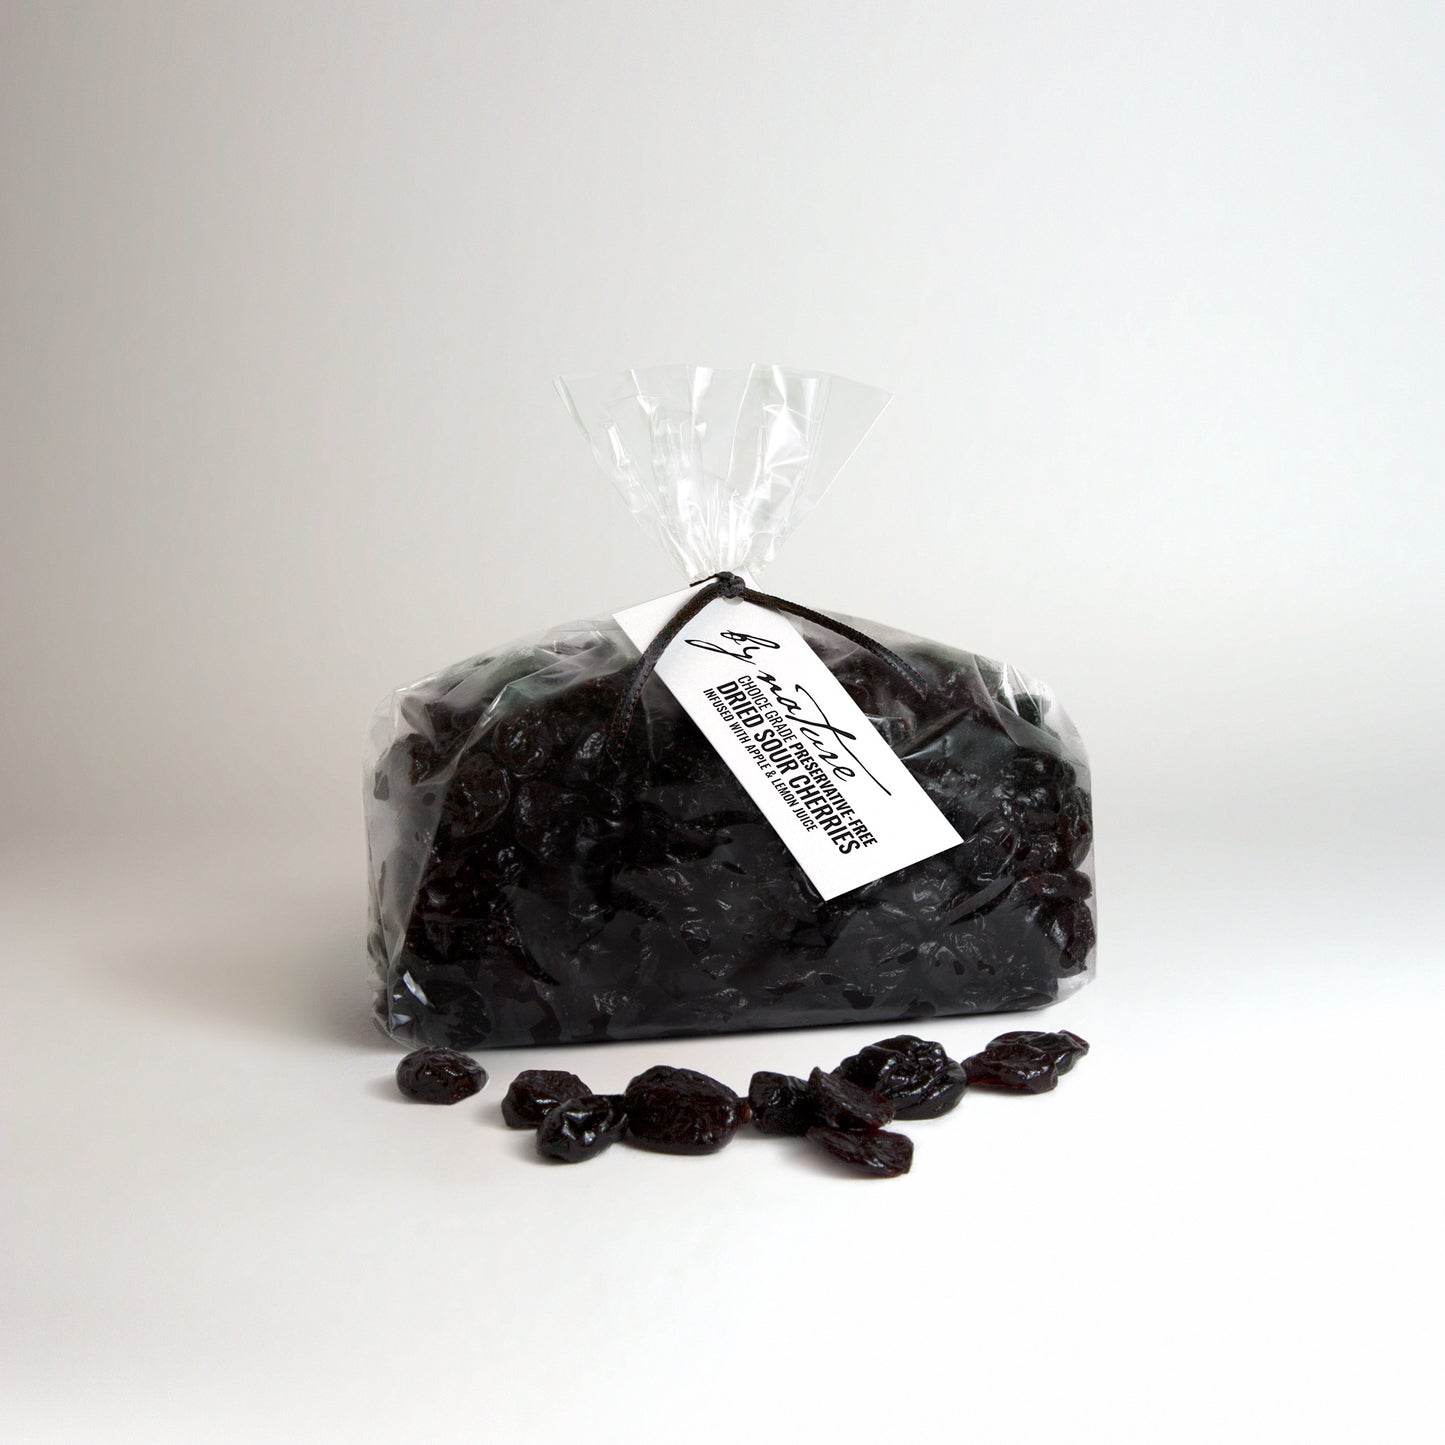 BY NATURE Dried Sour Cherries, 500g - apple juice infused, preservative-free.